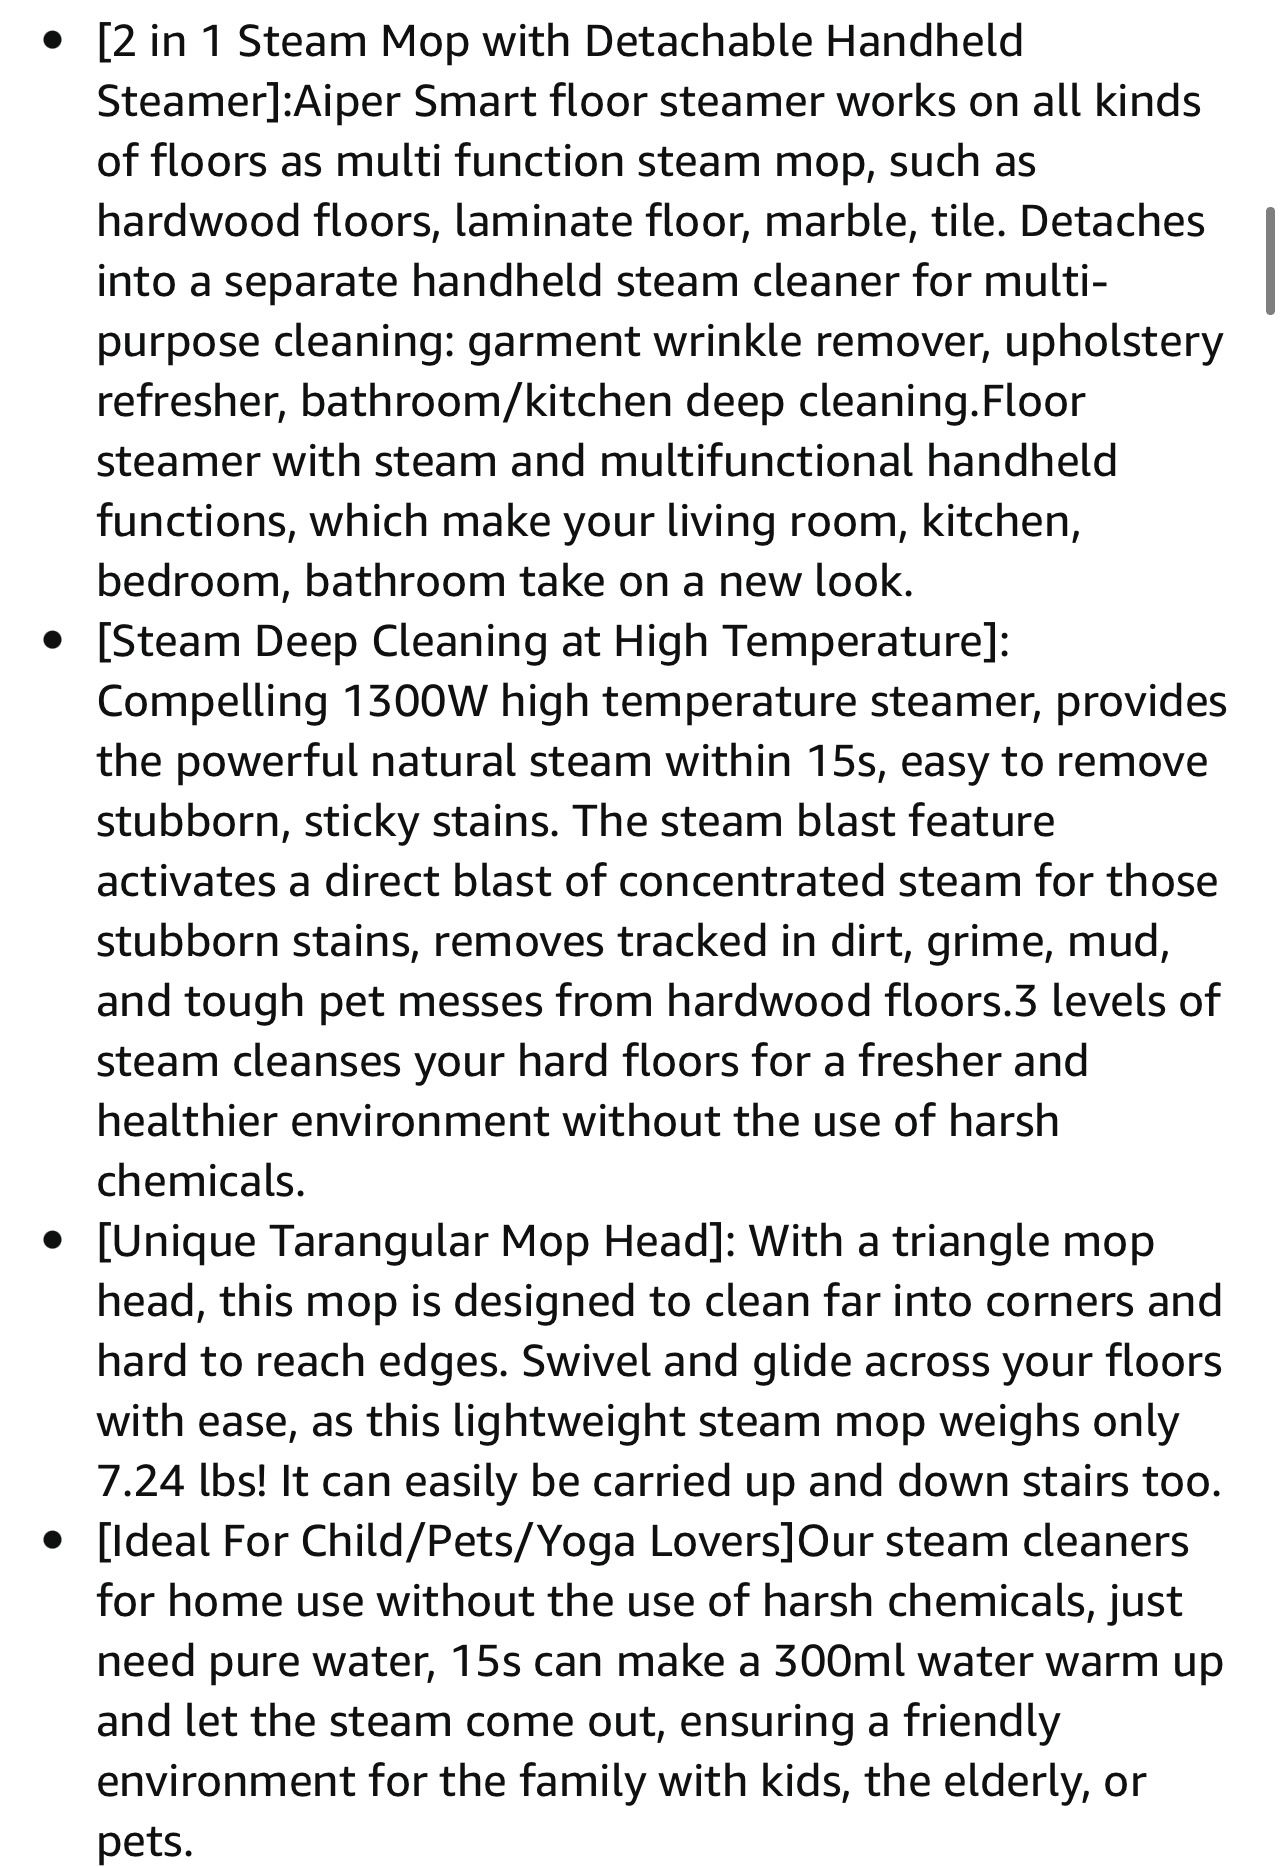 NEW 14 in 1 Multifunction steam mop